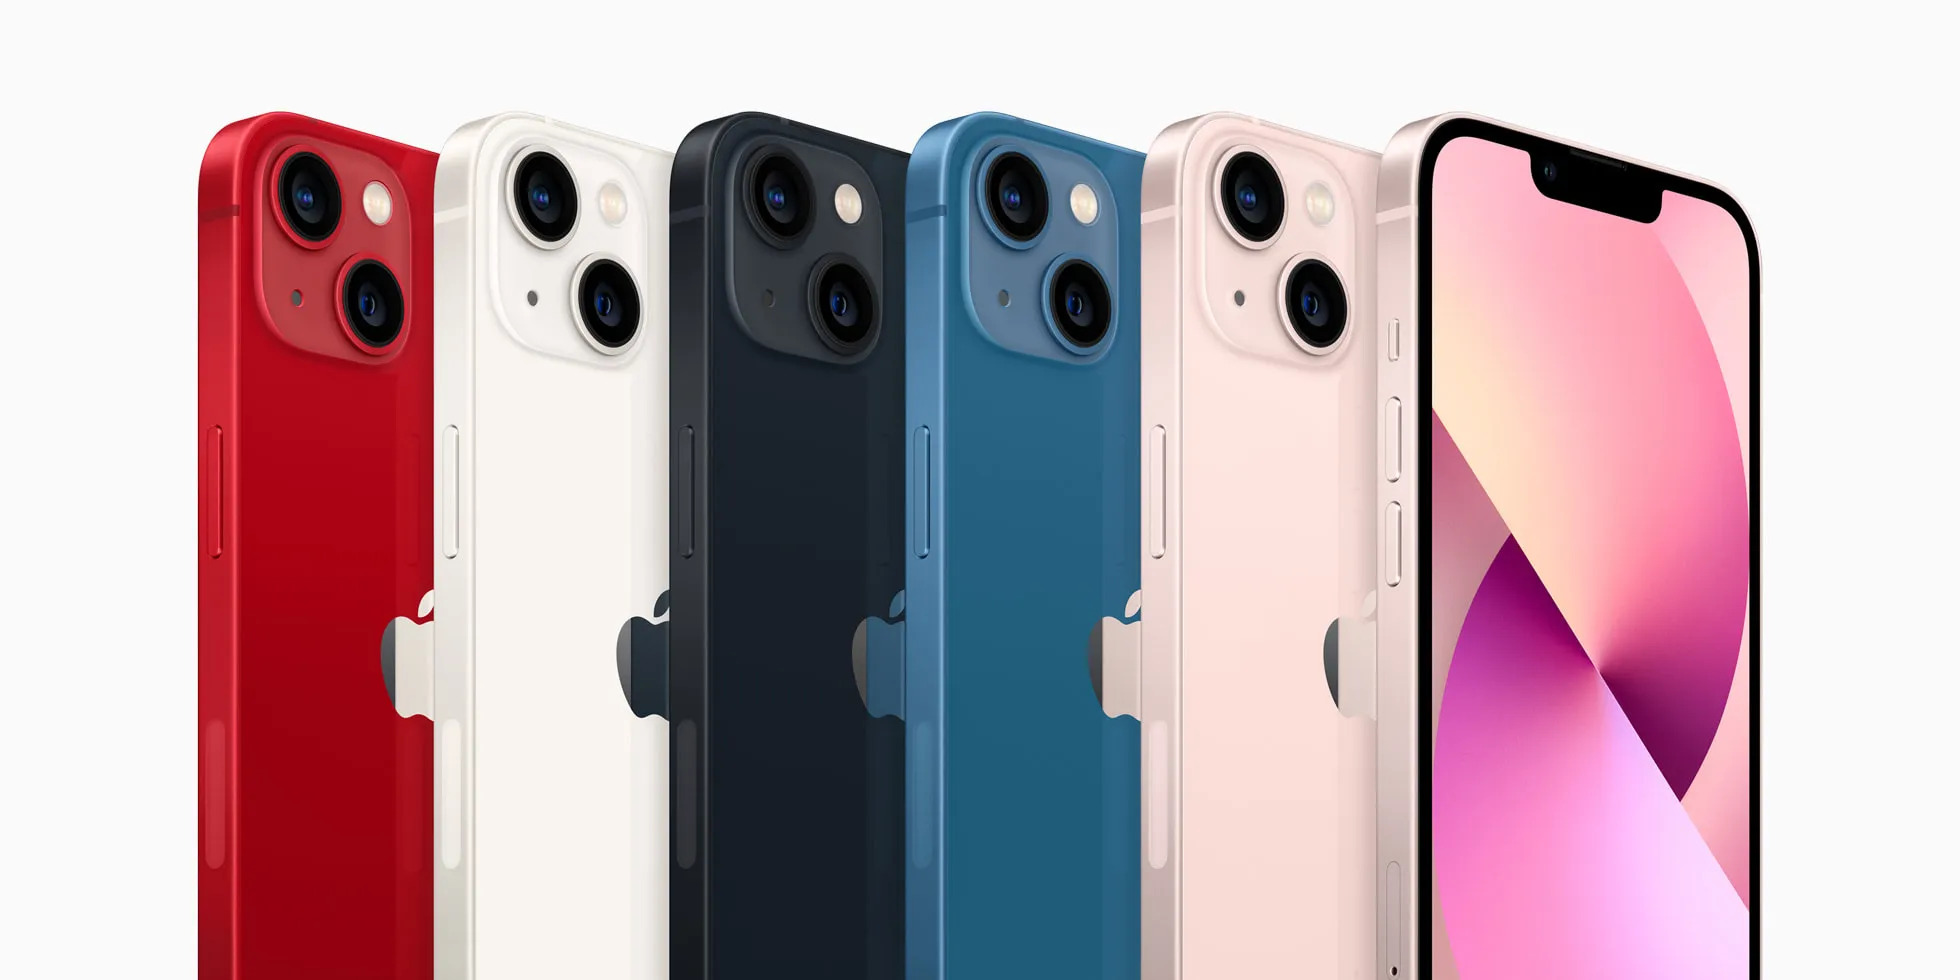 pre-ordering-the-iphone-13-heres-what-you-need-to-know